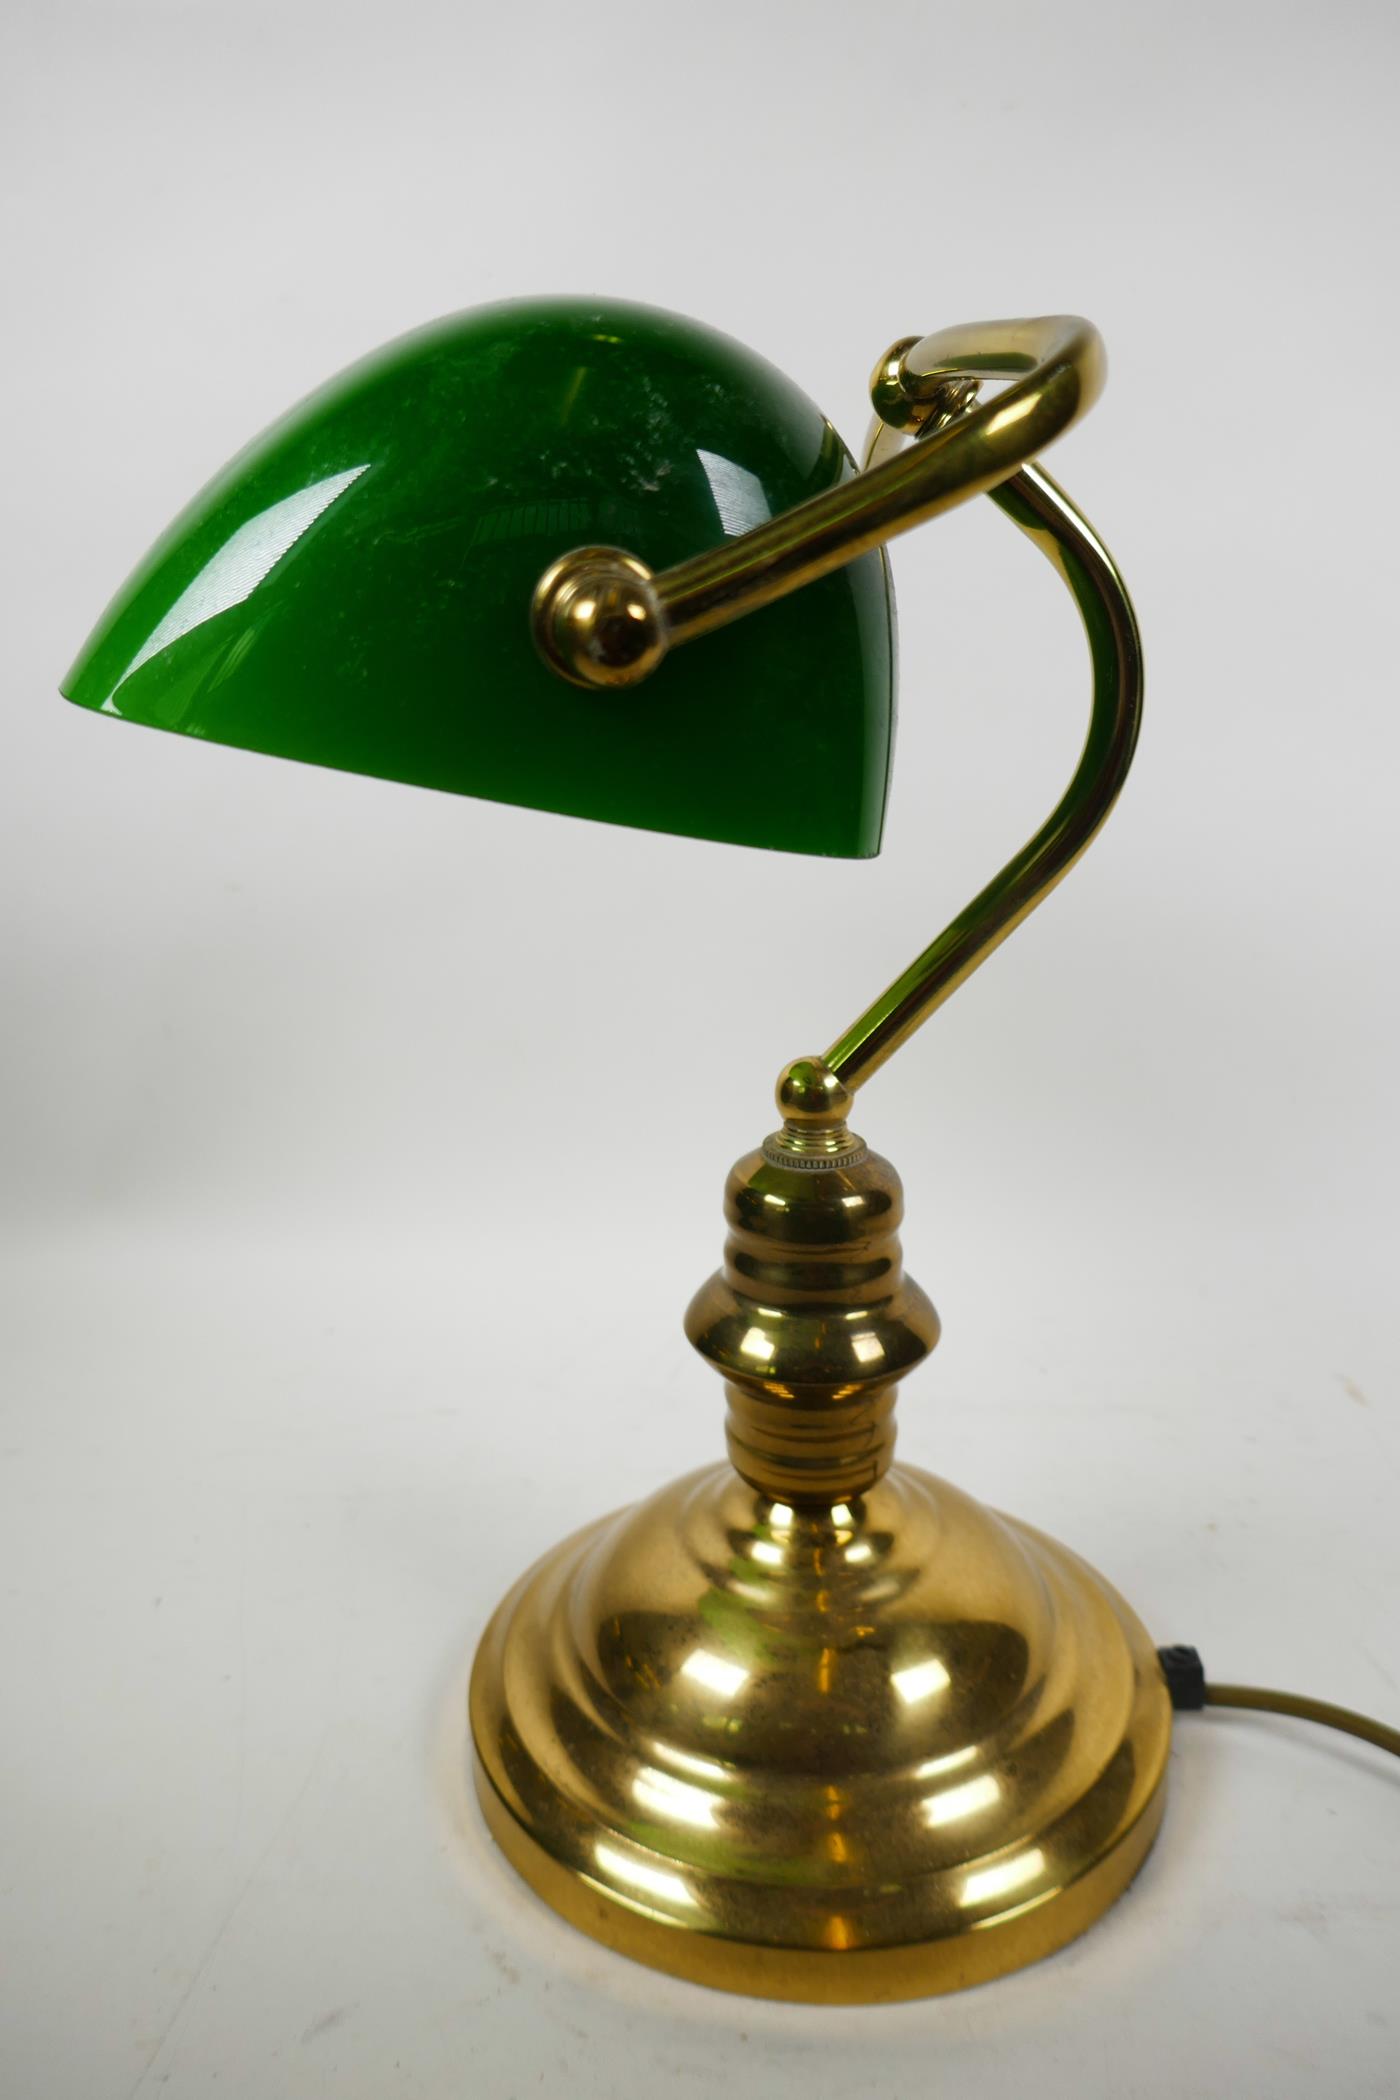 A brass desk lamp with adjustable green glass shade, 13" high - Image 3 of 3